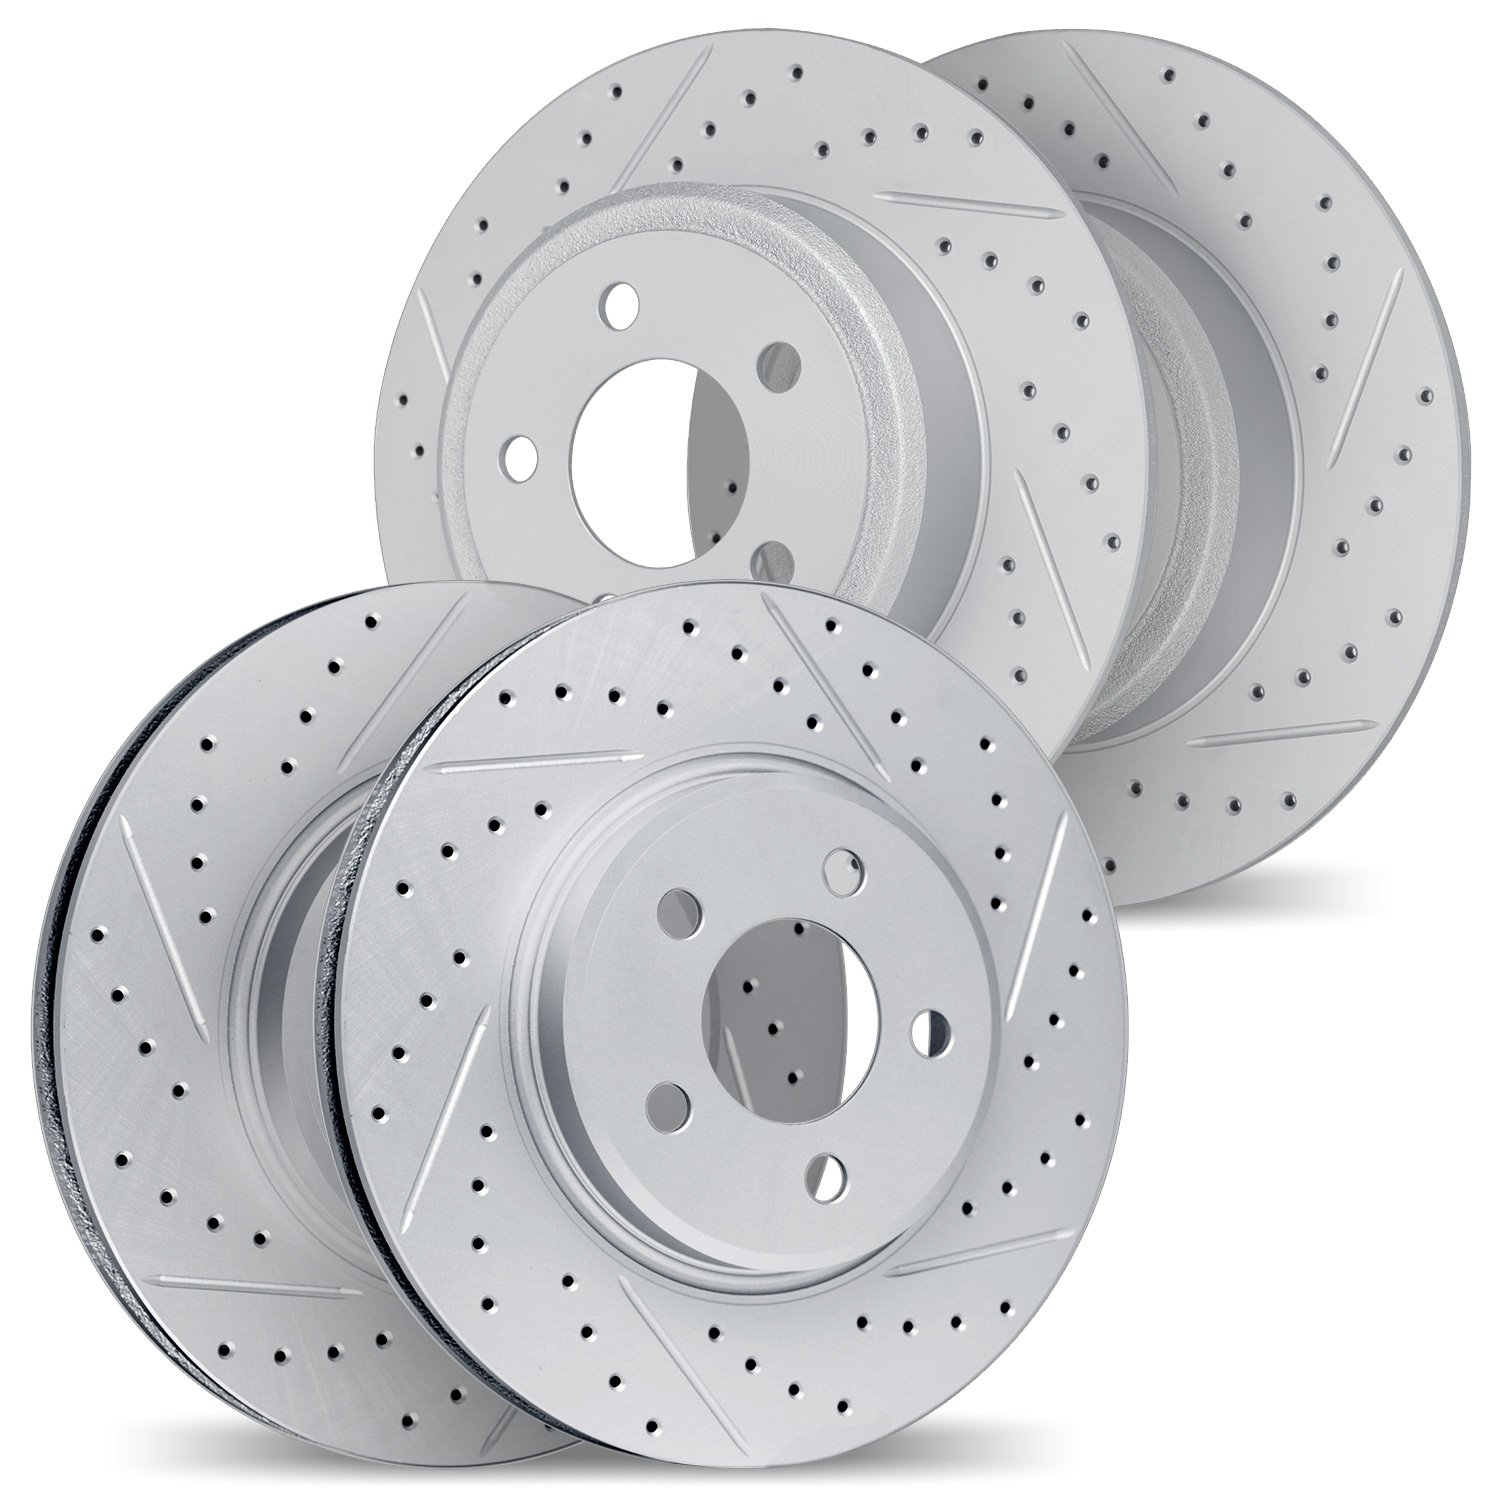 2004-31062 Geoperformance Drilled/Slotted Brake Rotors, 2000-2006 BMW, Position: Front and Rear